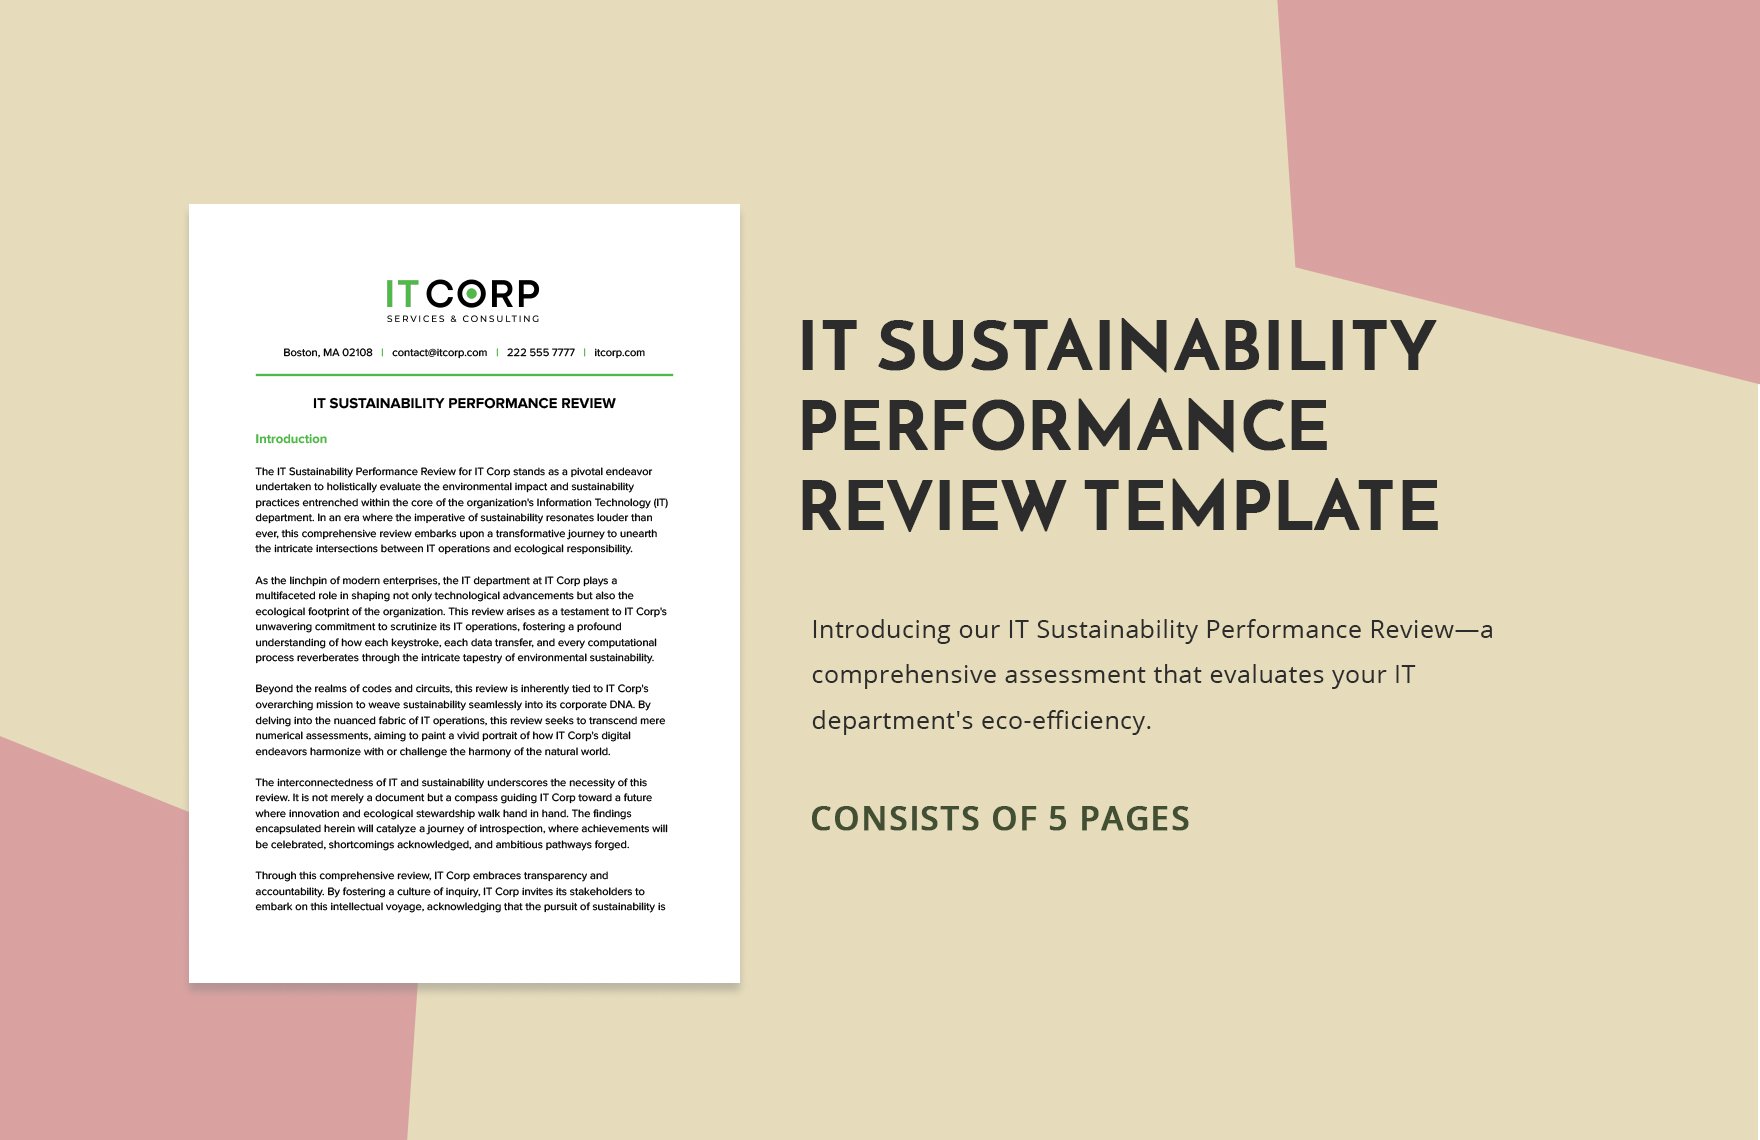 IT Sustainability Performance Review Template